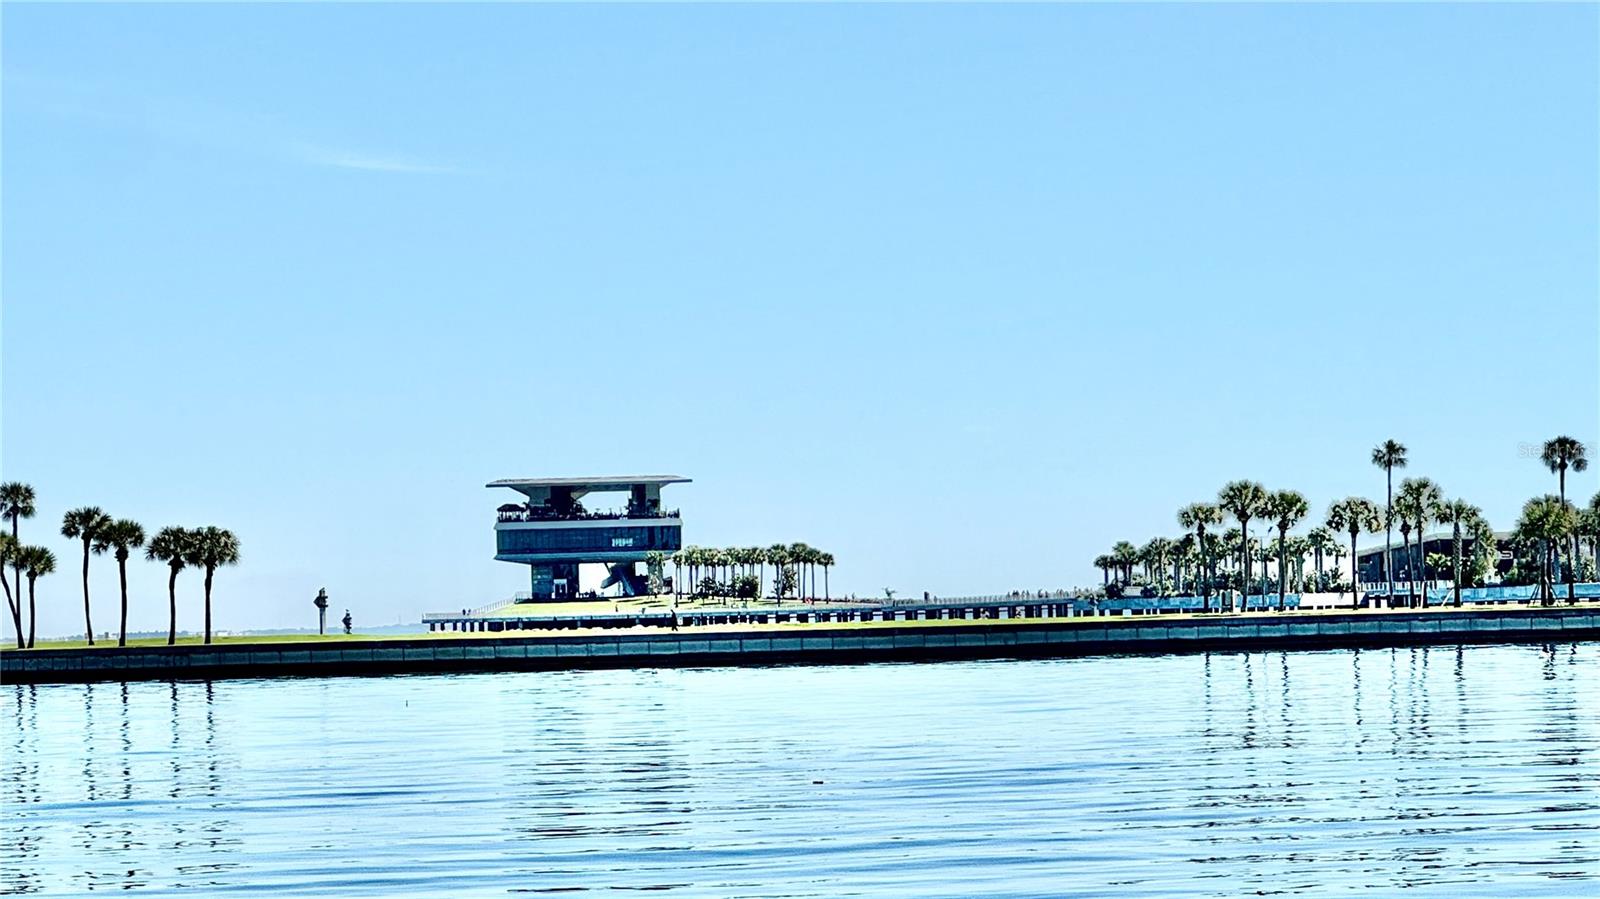 View of the Pier from the park.